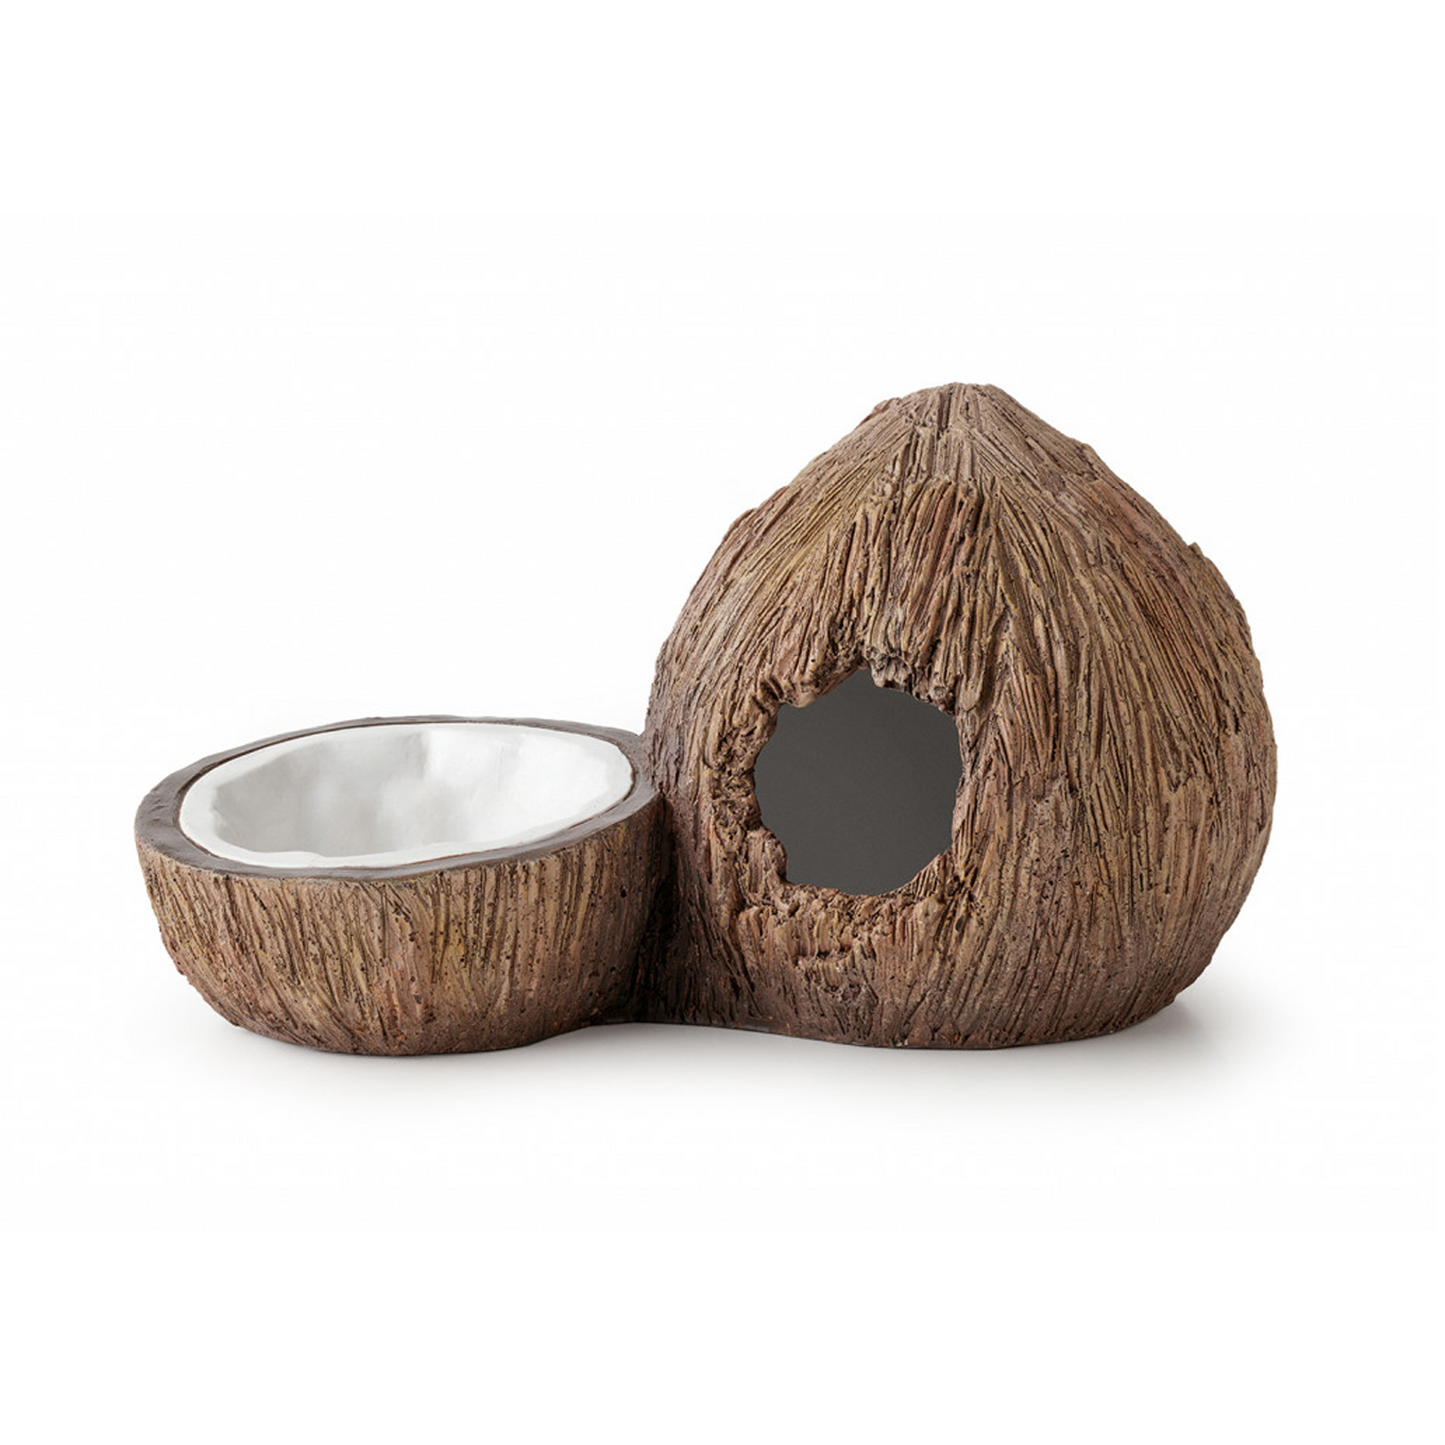 Exo Terra Tiki Coconut Hide and Water Dish